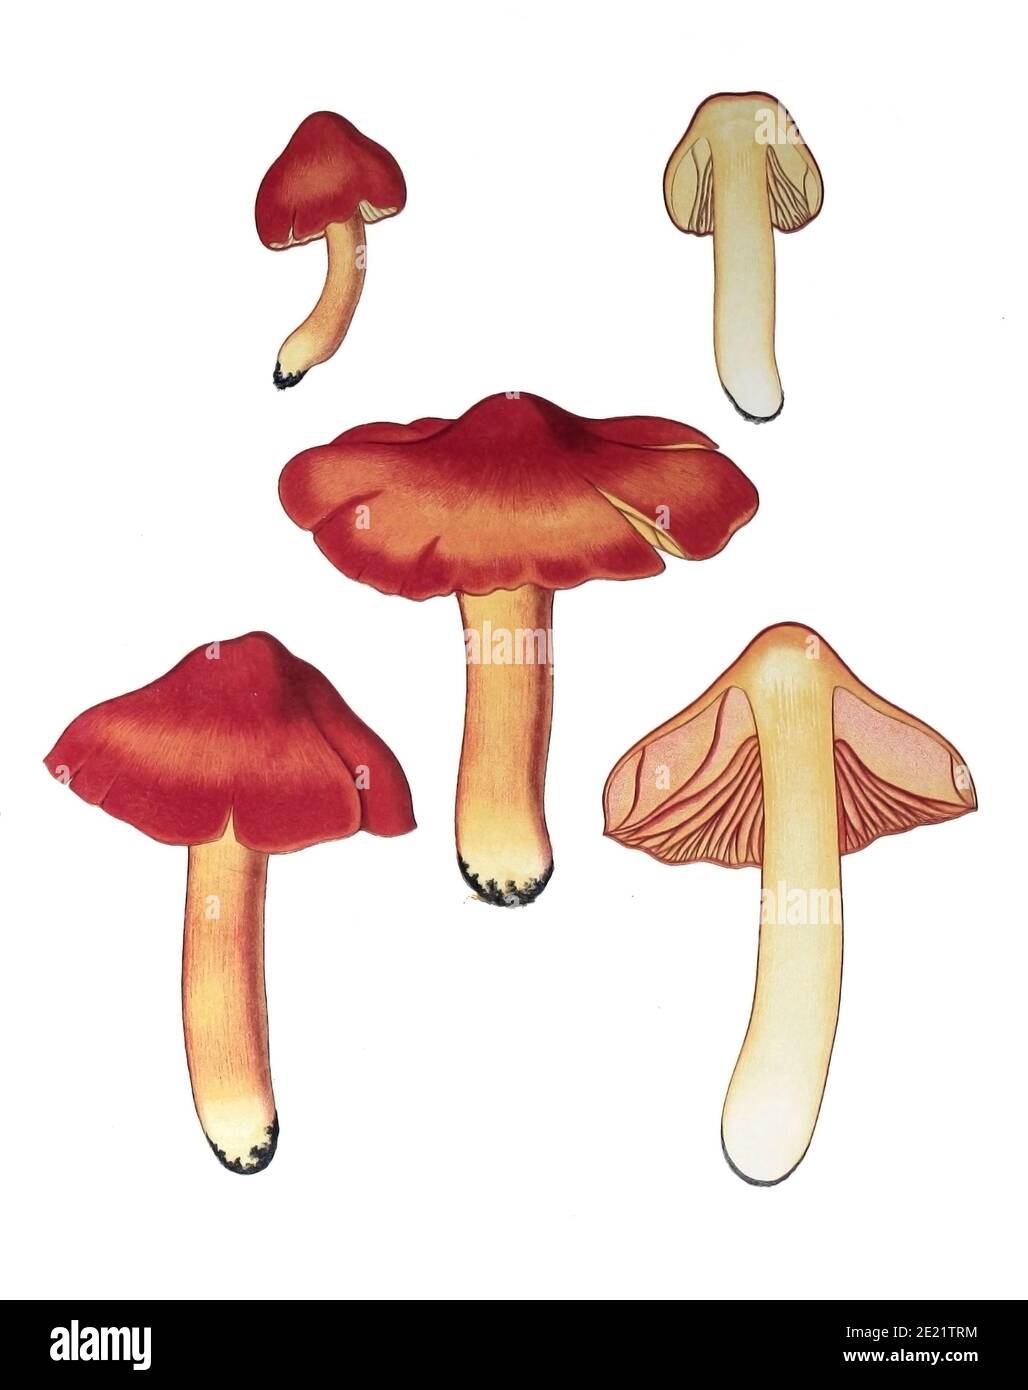 Hygrocybe punicea, sometimes called Crimson- or Scarlet Waxy Cap, is a colourful member of the genus Hygrocybe, the waxcaps, found across Northern Europe. Originally described as Hygrophorus puniceus, it is the largest member of the genus. from the book Sveriges ätliga och giftiga svampar tecknade efter naturen under ledning [Sweden's edible and poisonous mushrooms drawn after nature under guidance] By Fries, Elias, 1794-1878; Kungl. Svenska vetenskapsakademien Published in Stockholm, Sweden in 1861 Stock Photo